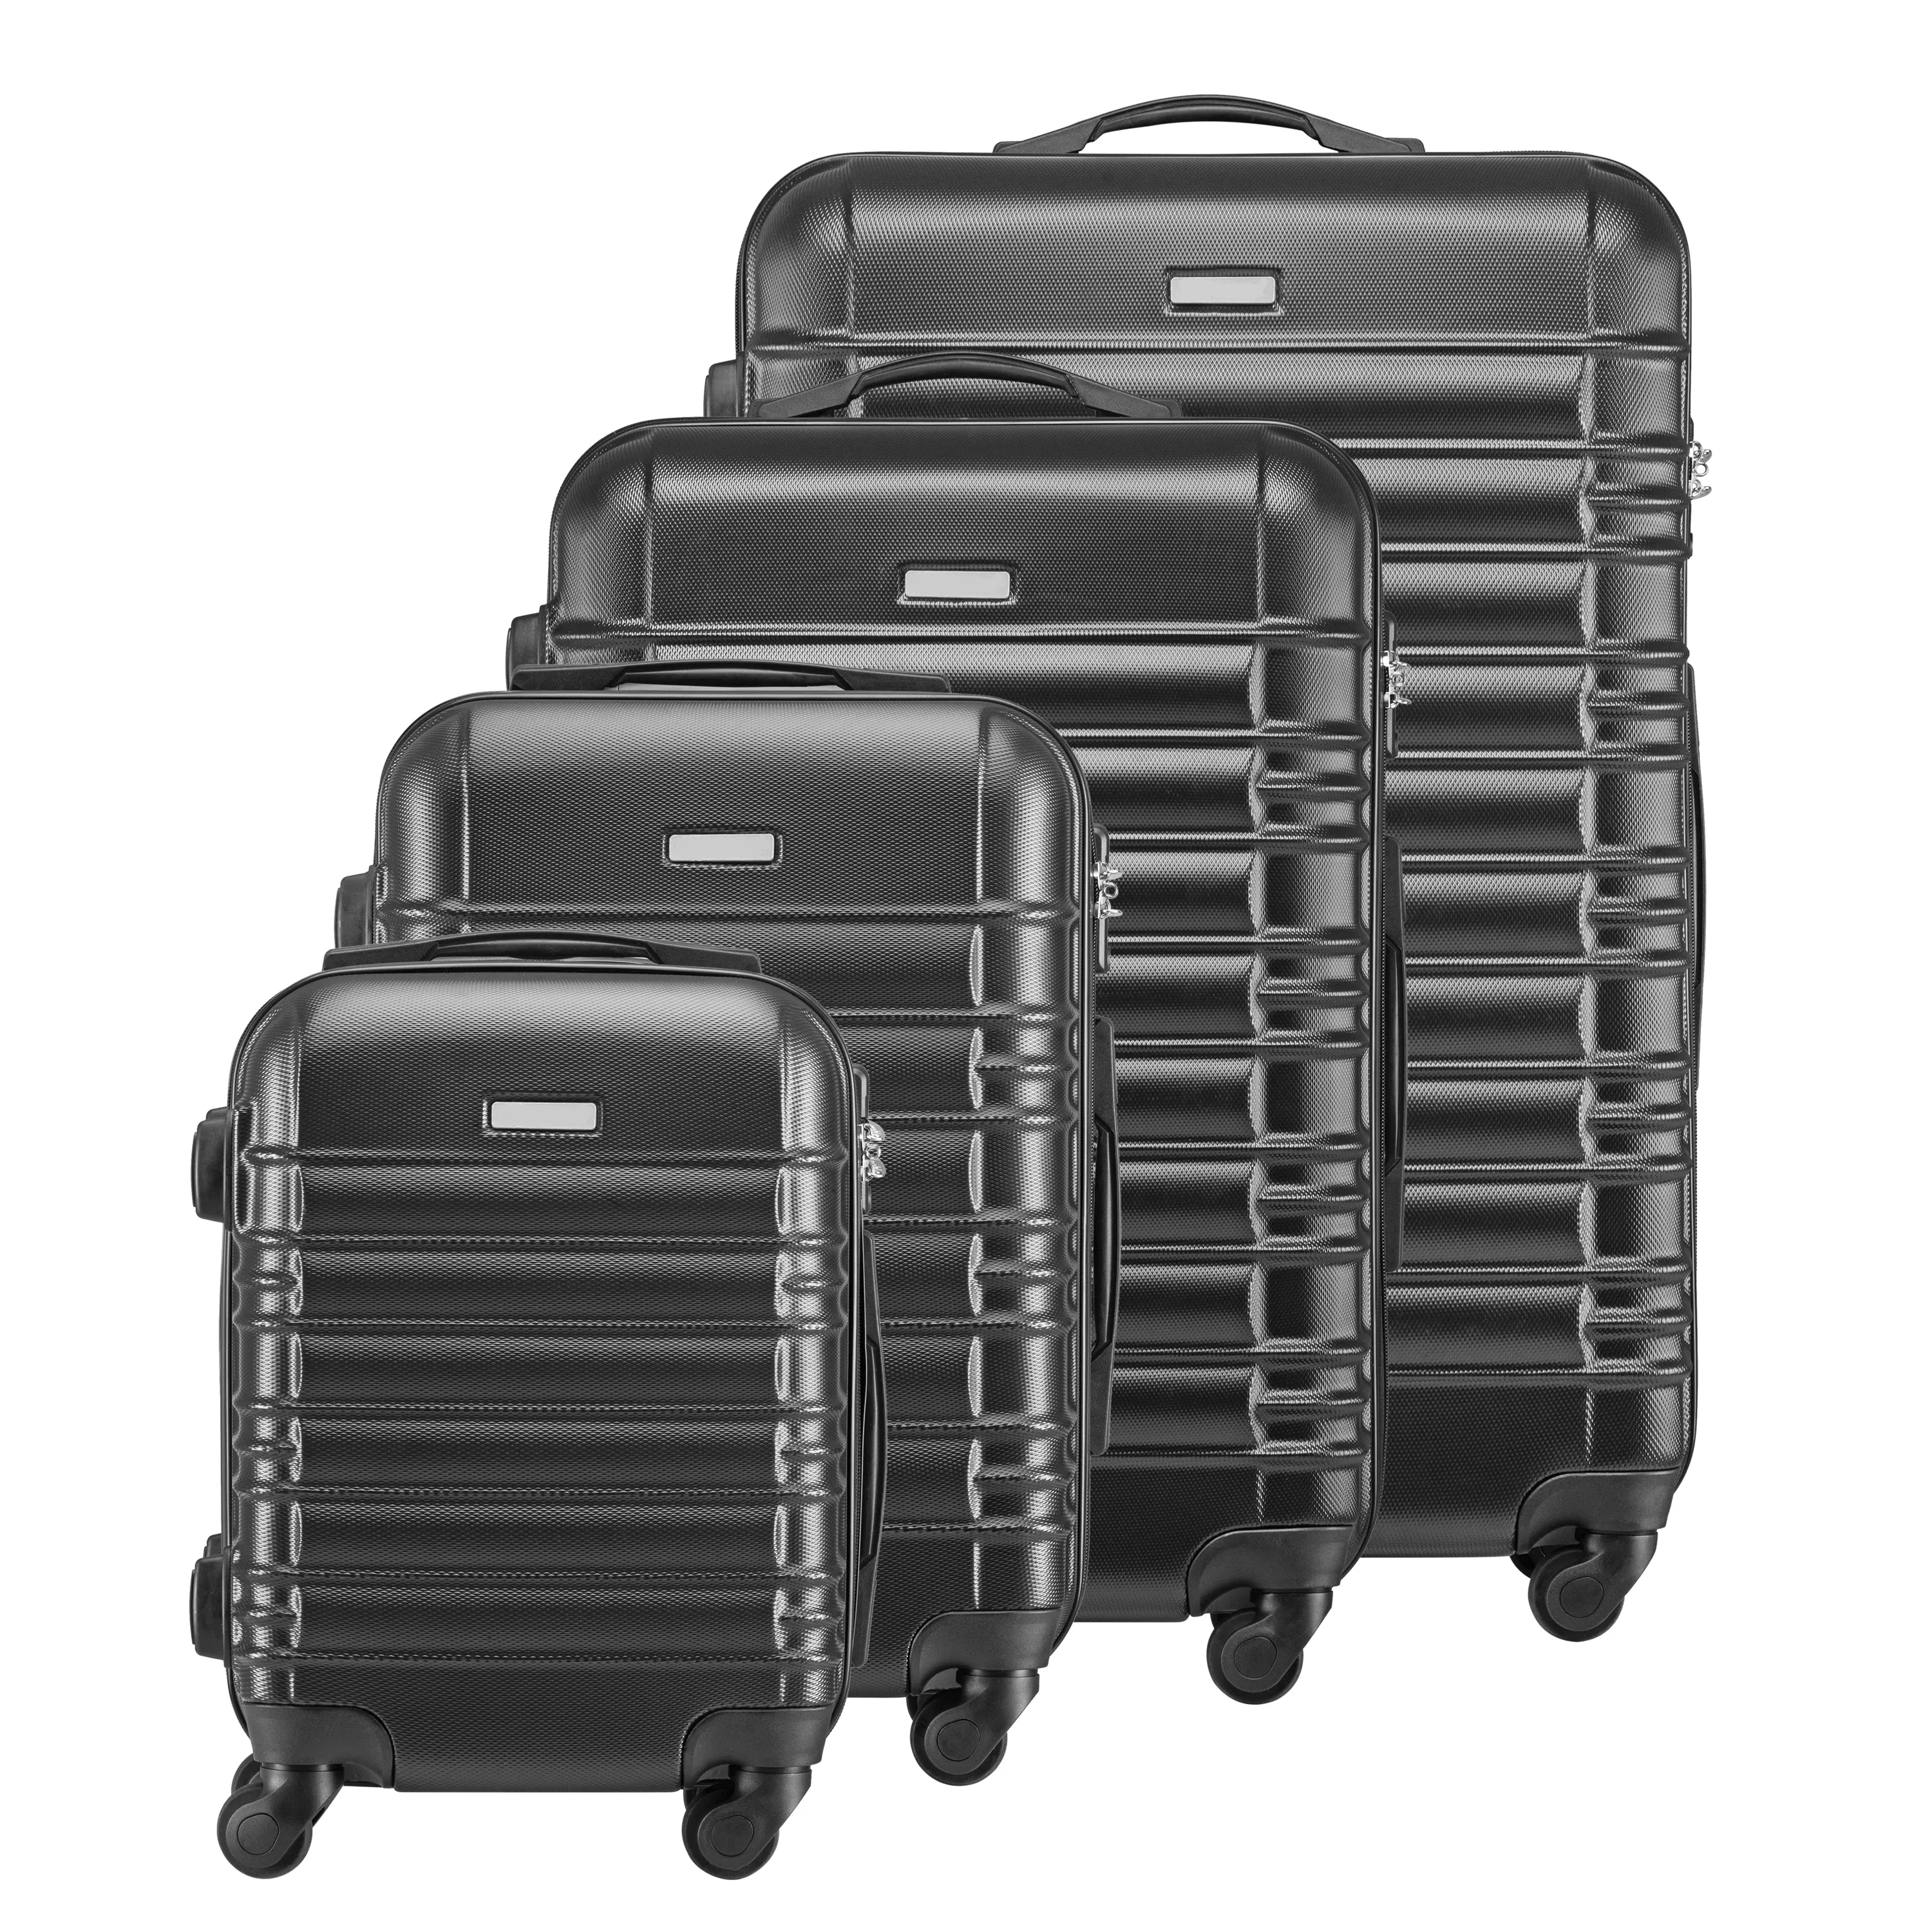 High quality 4 Piece 16" 20" 24" 28" luggage set ABS Hard Shell Cases travel bags Trolley suitcase luggage sets